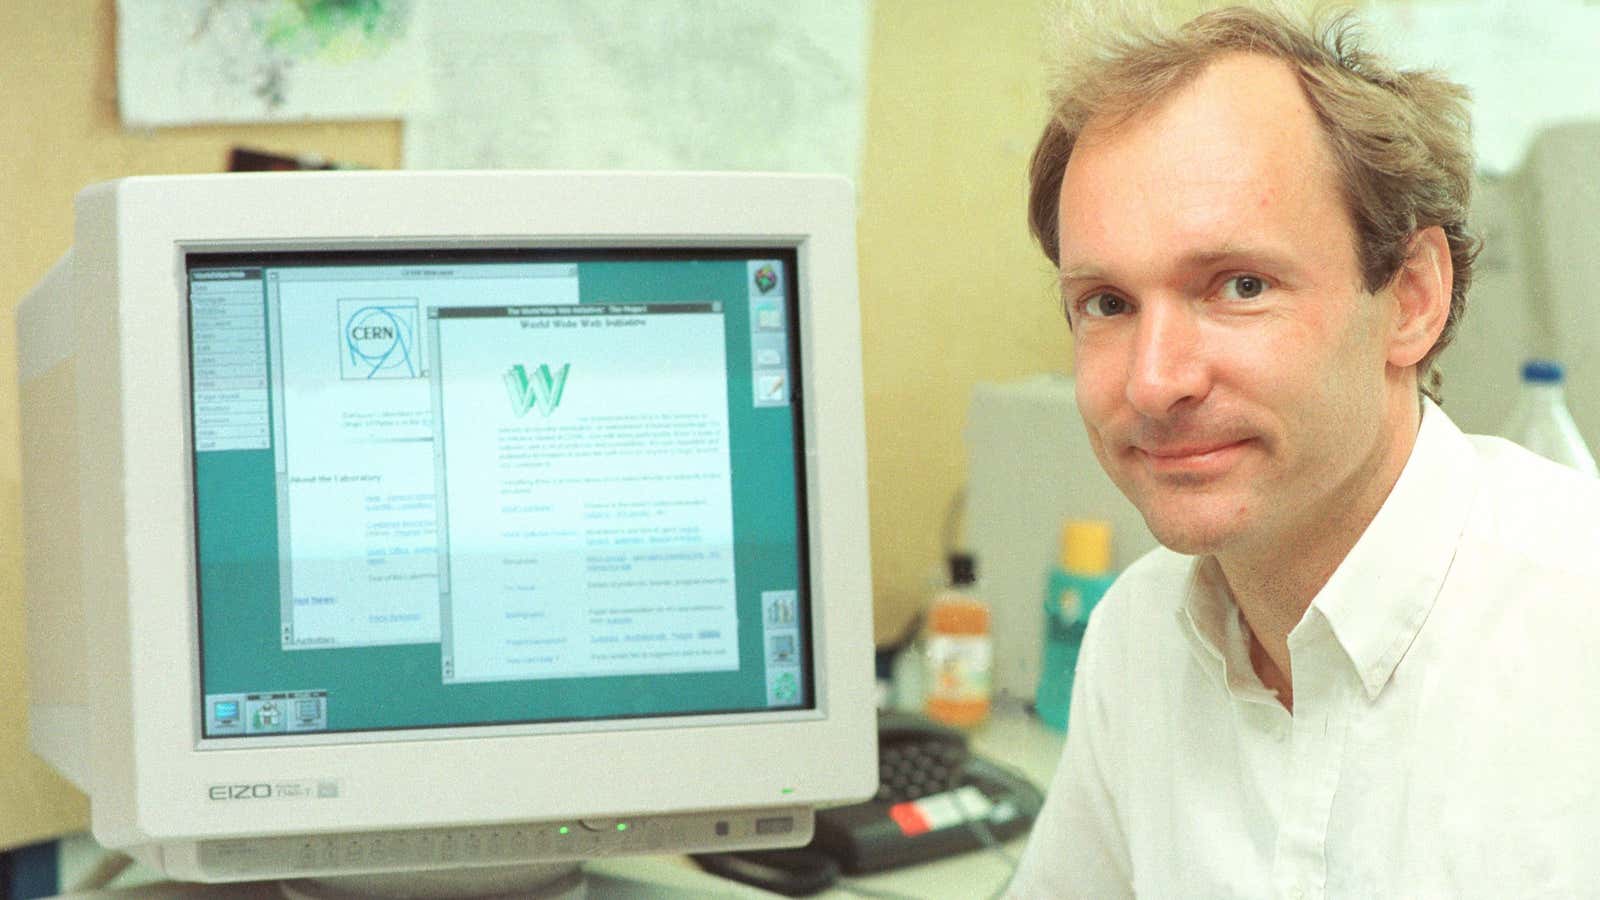 Tim Berners-Lee, the father of the Internet, sits in front of a 1994 computer displaying his creation.